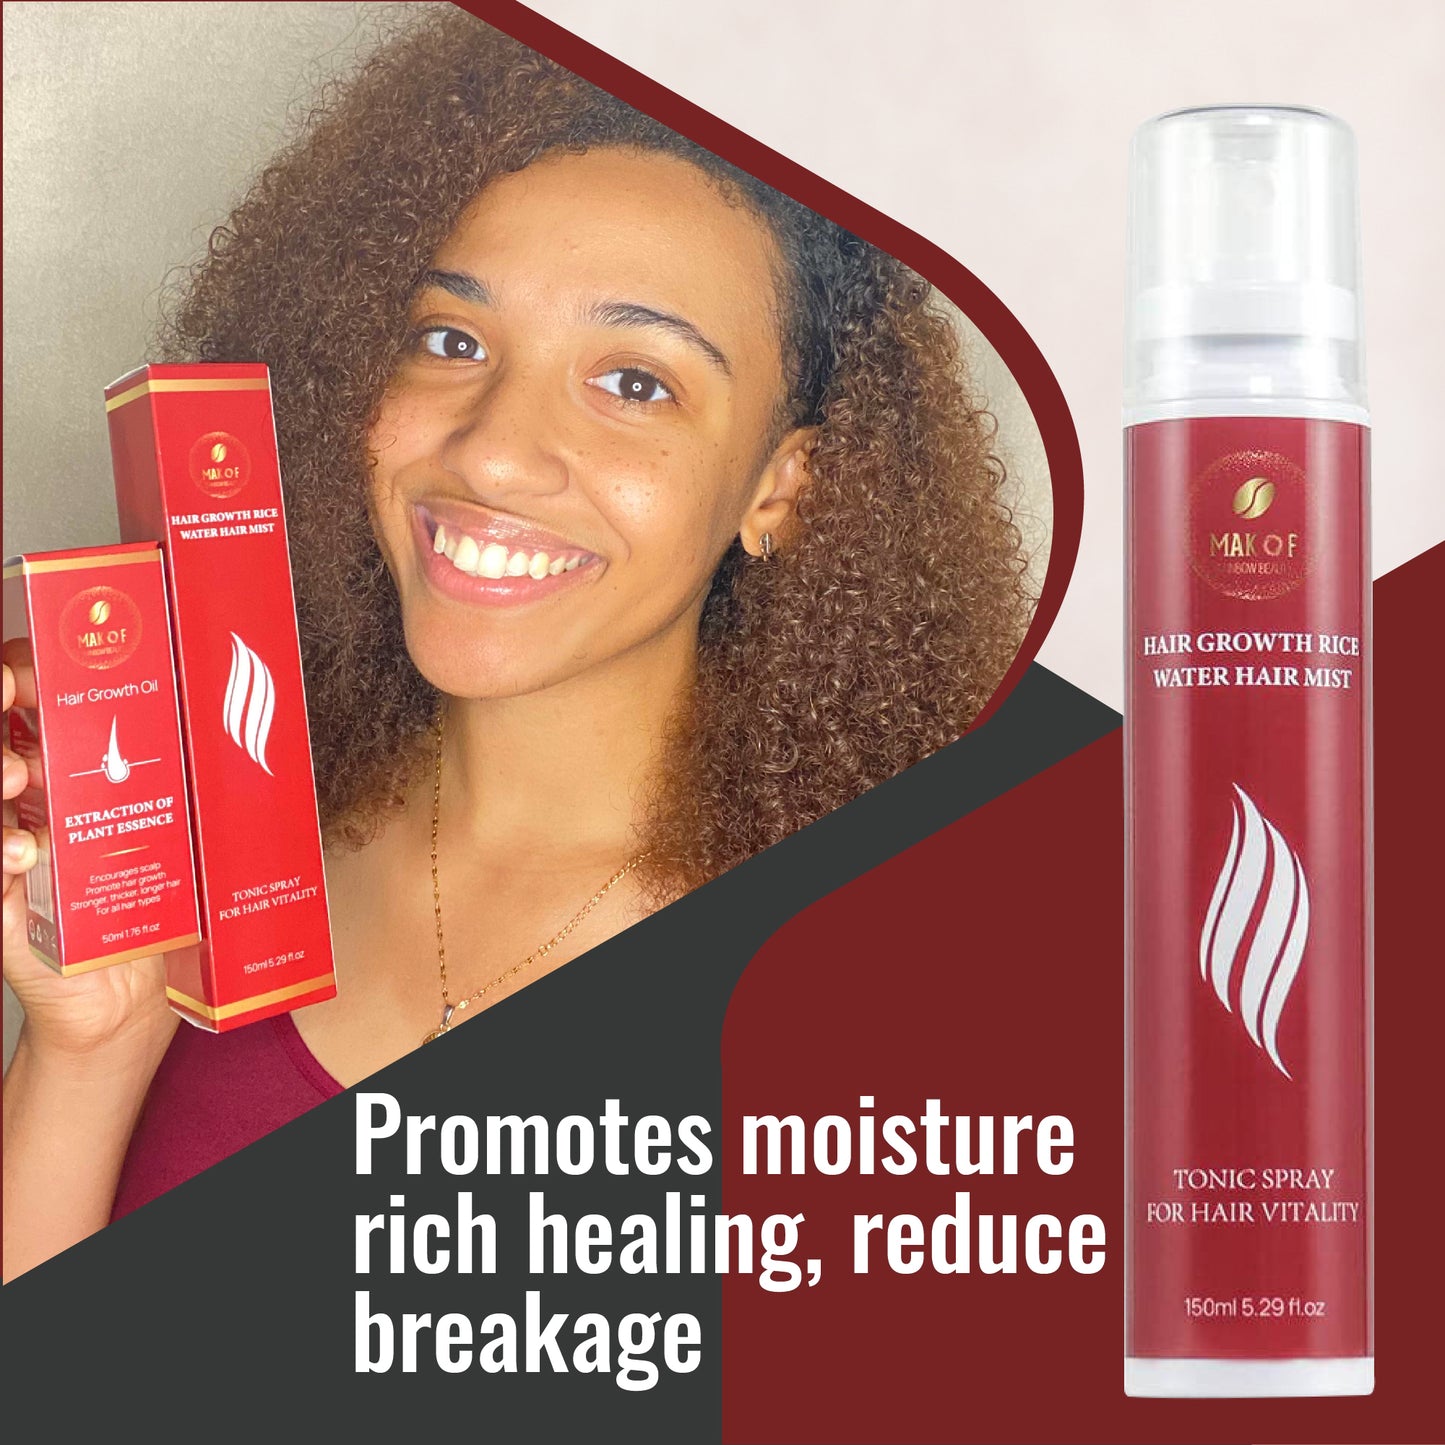 Hair Growth Treatment Set for Dry and Damaged Hair, Rice water spray for growth and moisturizing - hair growth oil for hair regrowth. Silicone and Sulfate Free.